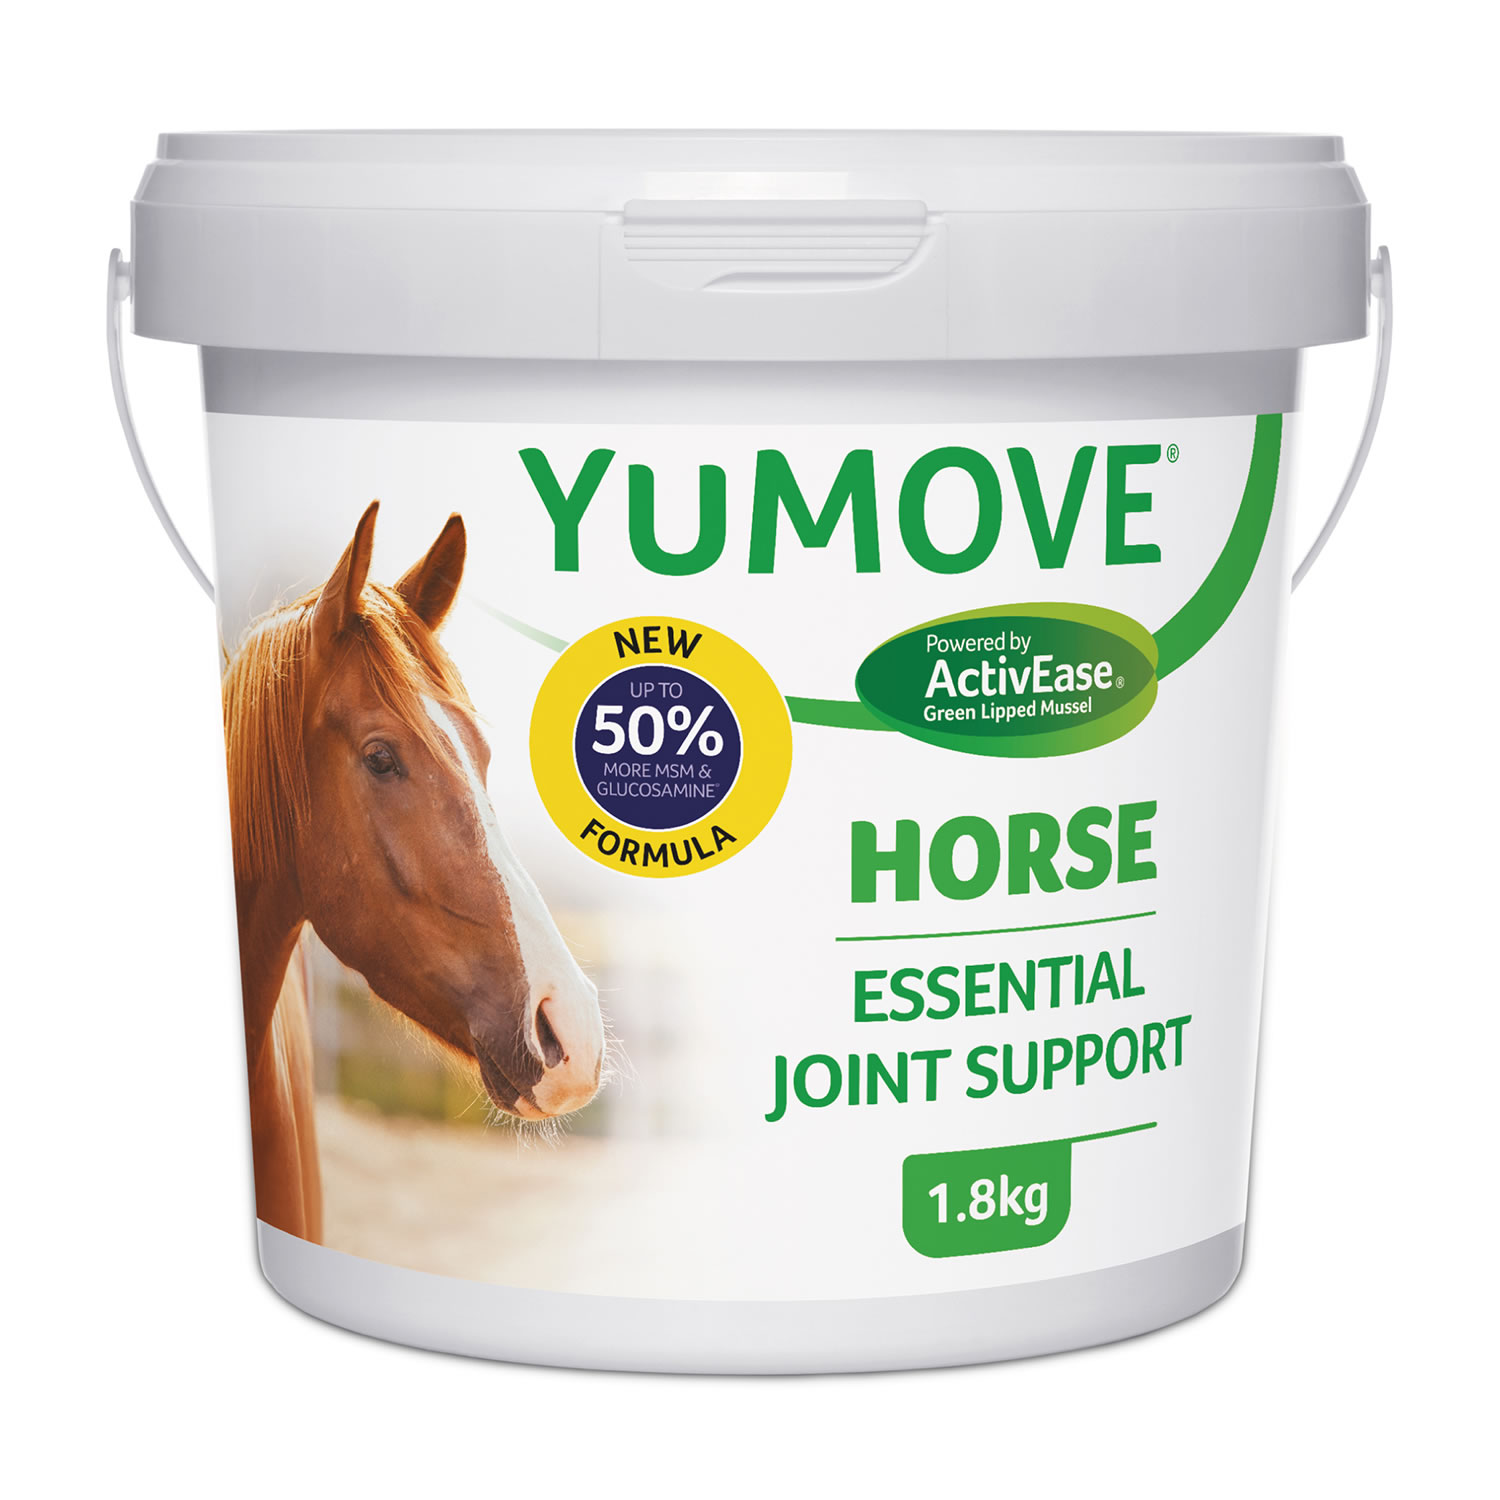 LINTBELLS YUMOVE HORSE ESSENTIAL JOINT SUPPORT 1.8 KG 1.8 KG